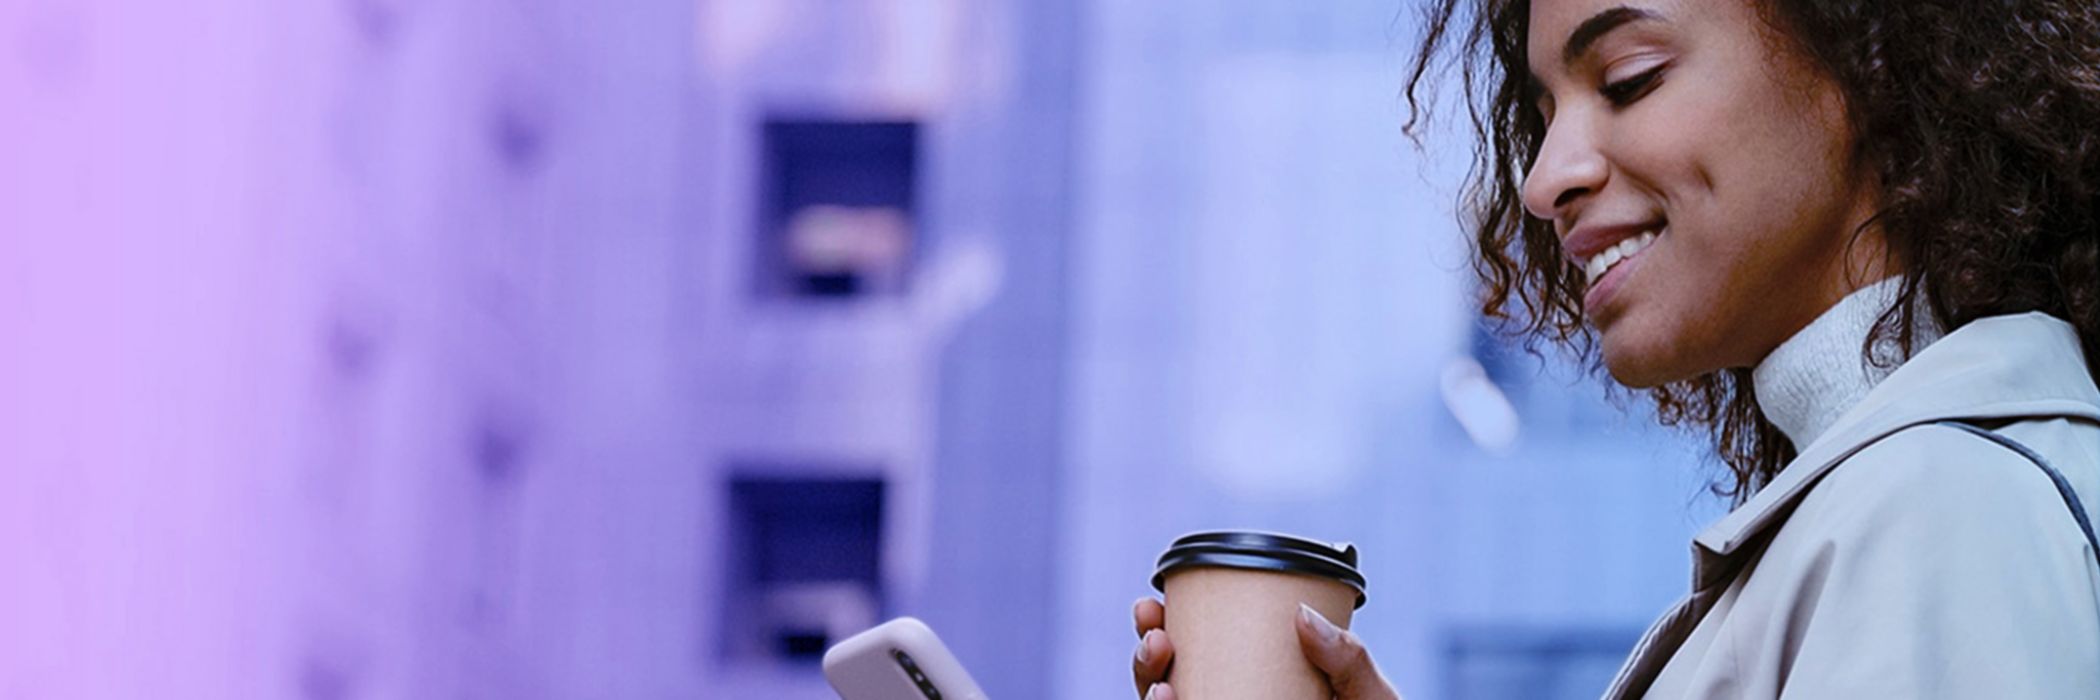 Transform your business with KPMG Connected Enterprise